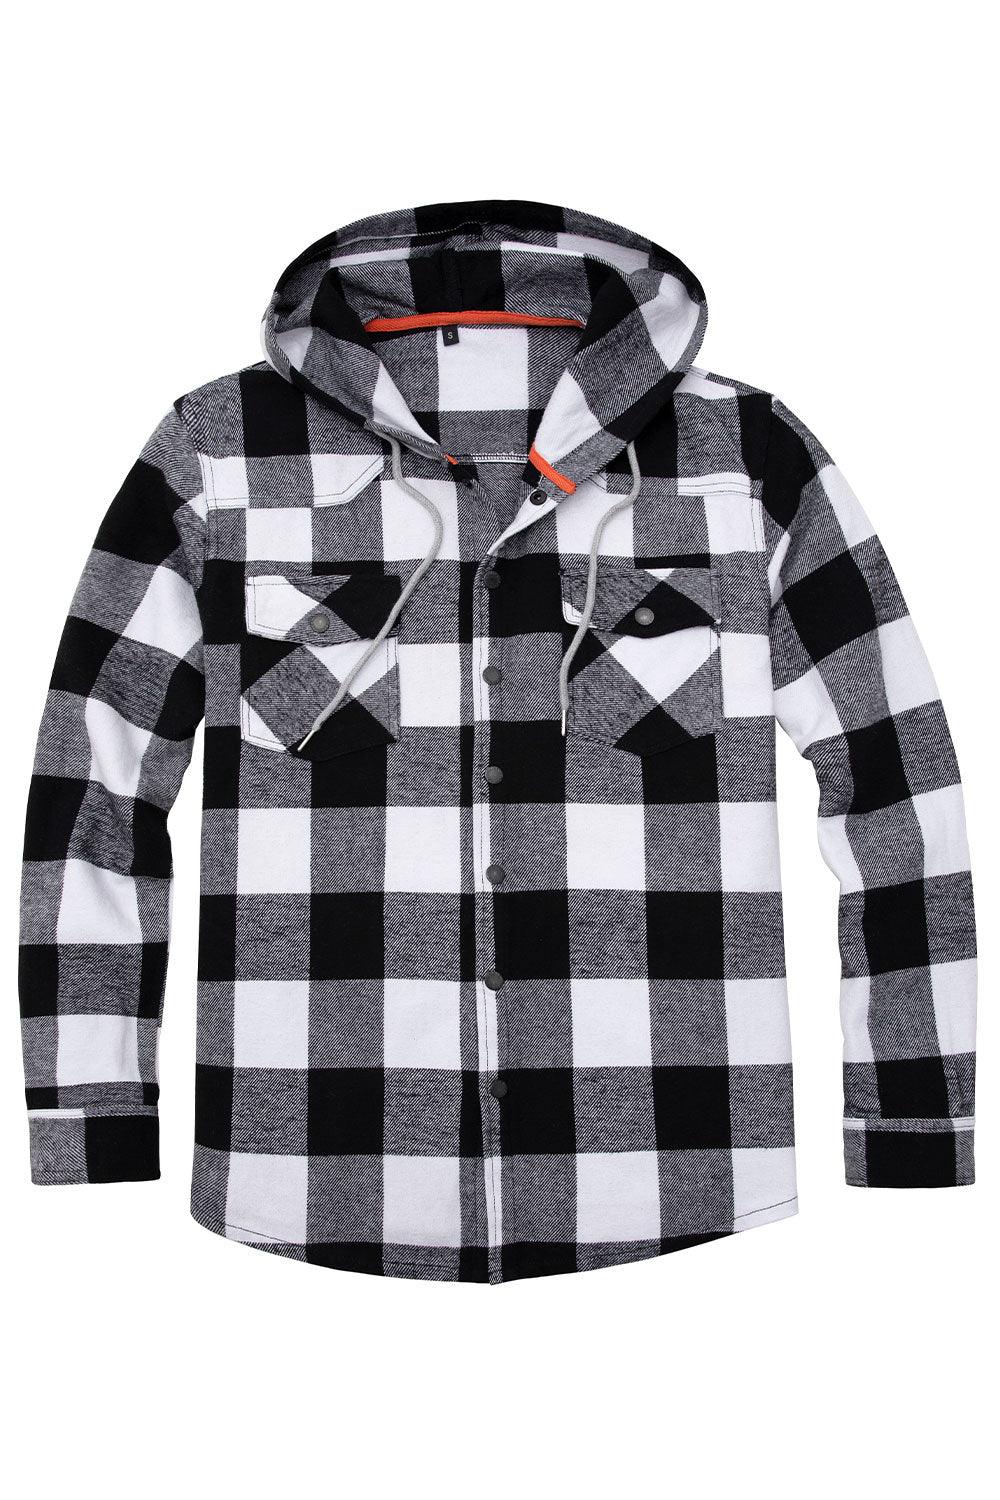 Men's Heavyweight Flannel Hoodie,Double Brushed 100% Cotton,Relaxed Fit